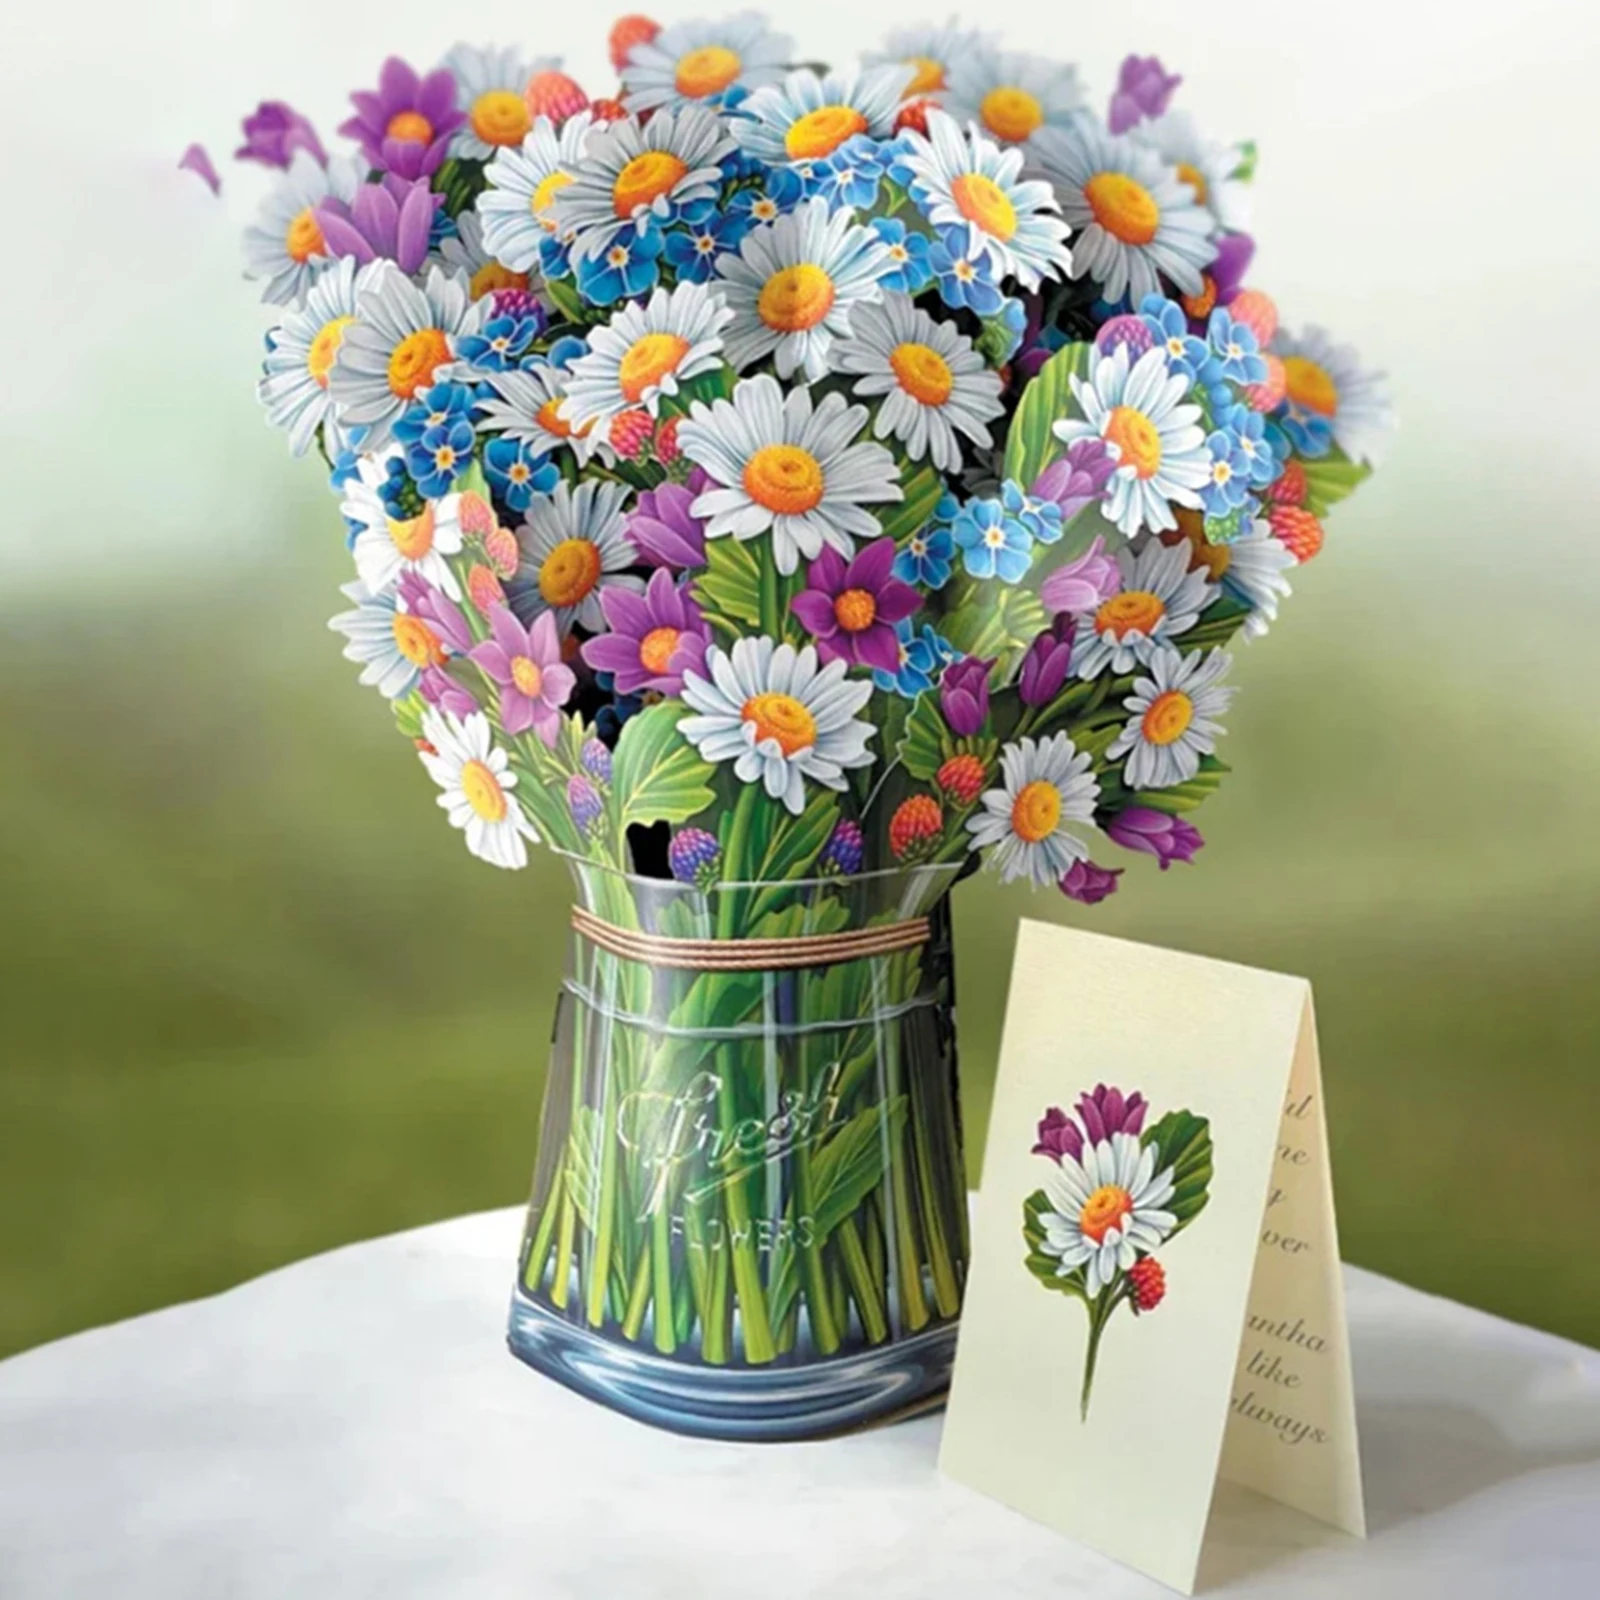 3D Flower Bouquet Card Paper Flowers Pops-Up Flower Bouquet Greeting Card Mothers Day Wedding Anniversary Postcard